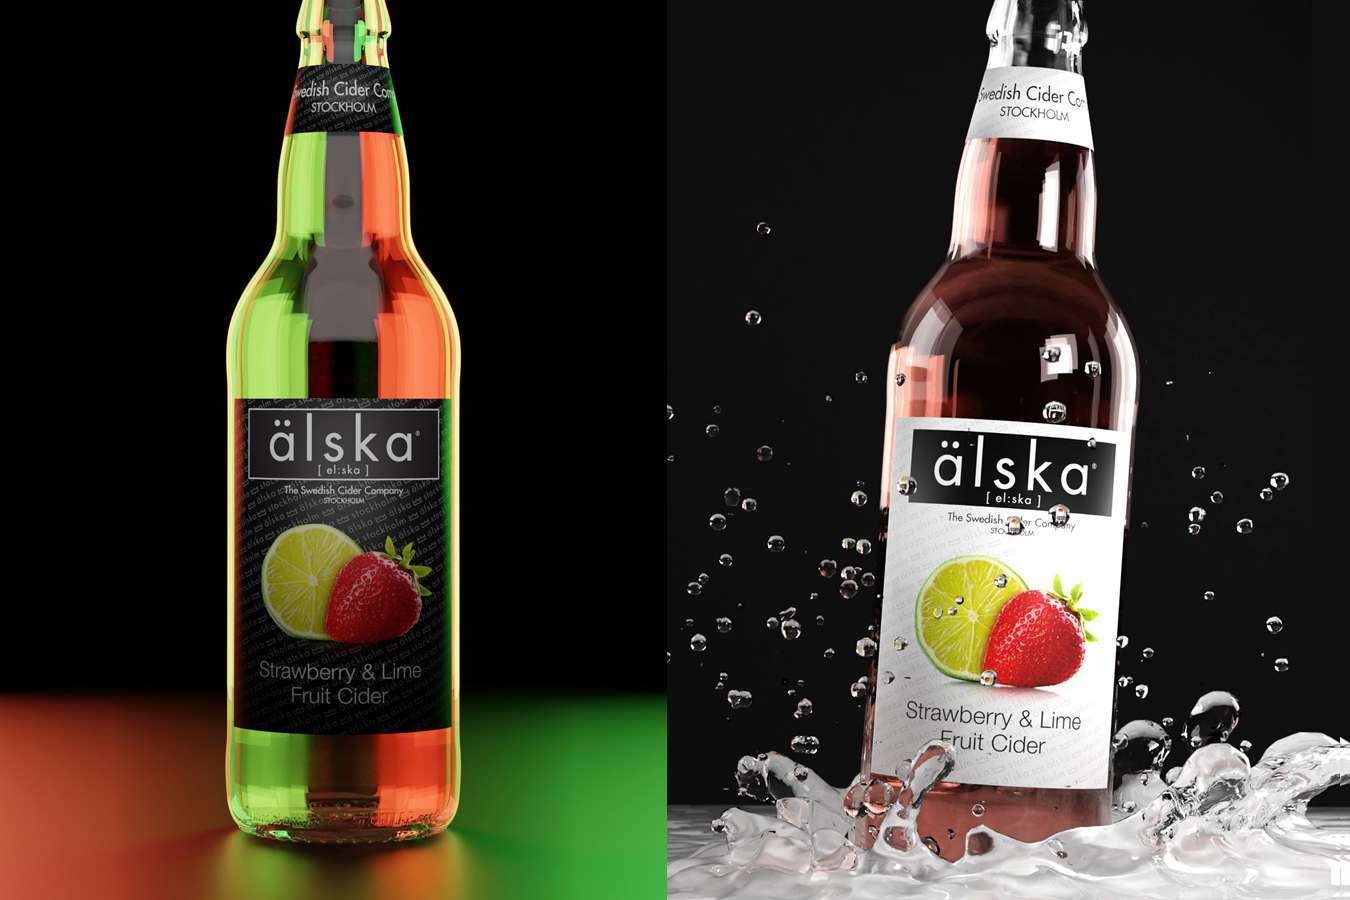 Two bottle of älska cider next to each other, one side of the image has a red, green and blackground, the other is creating a splash of water